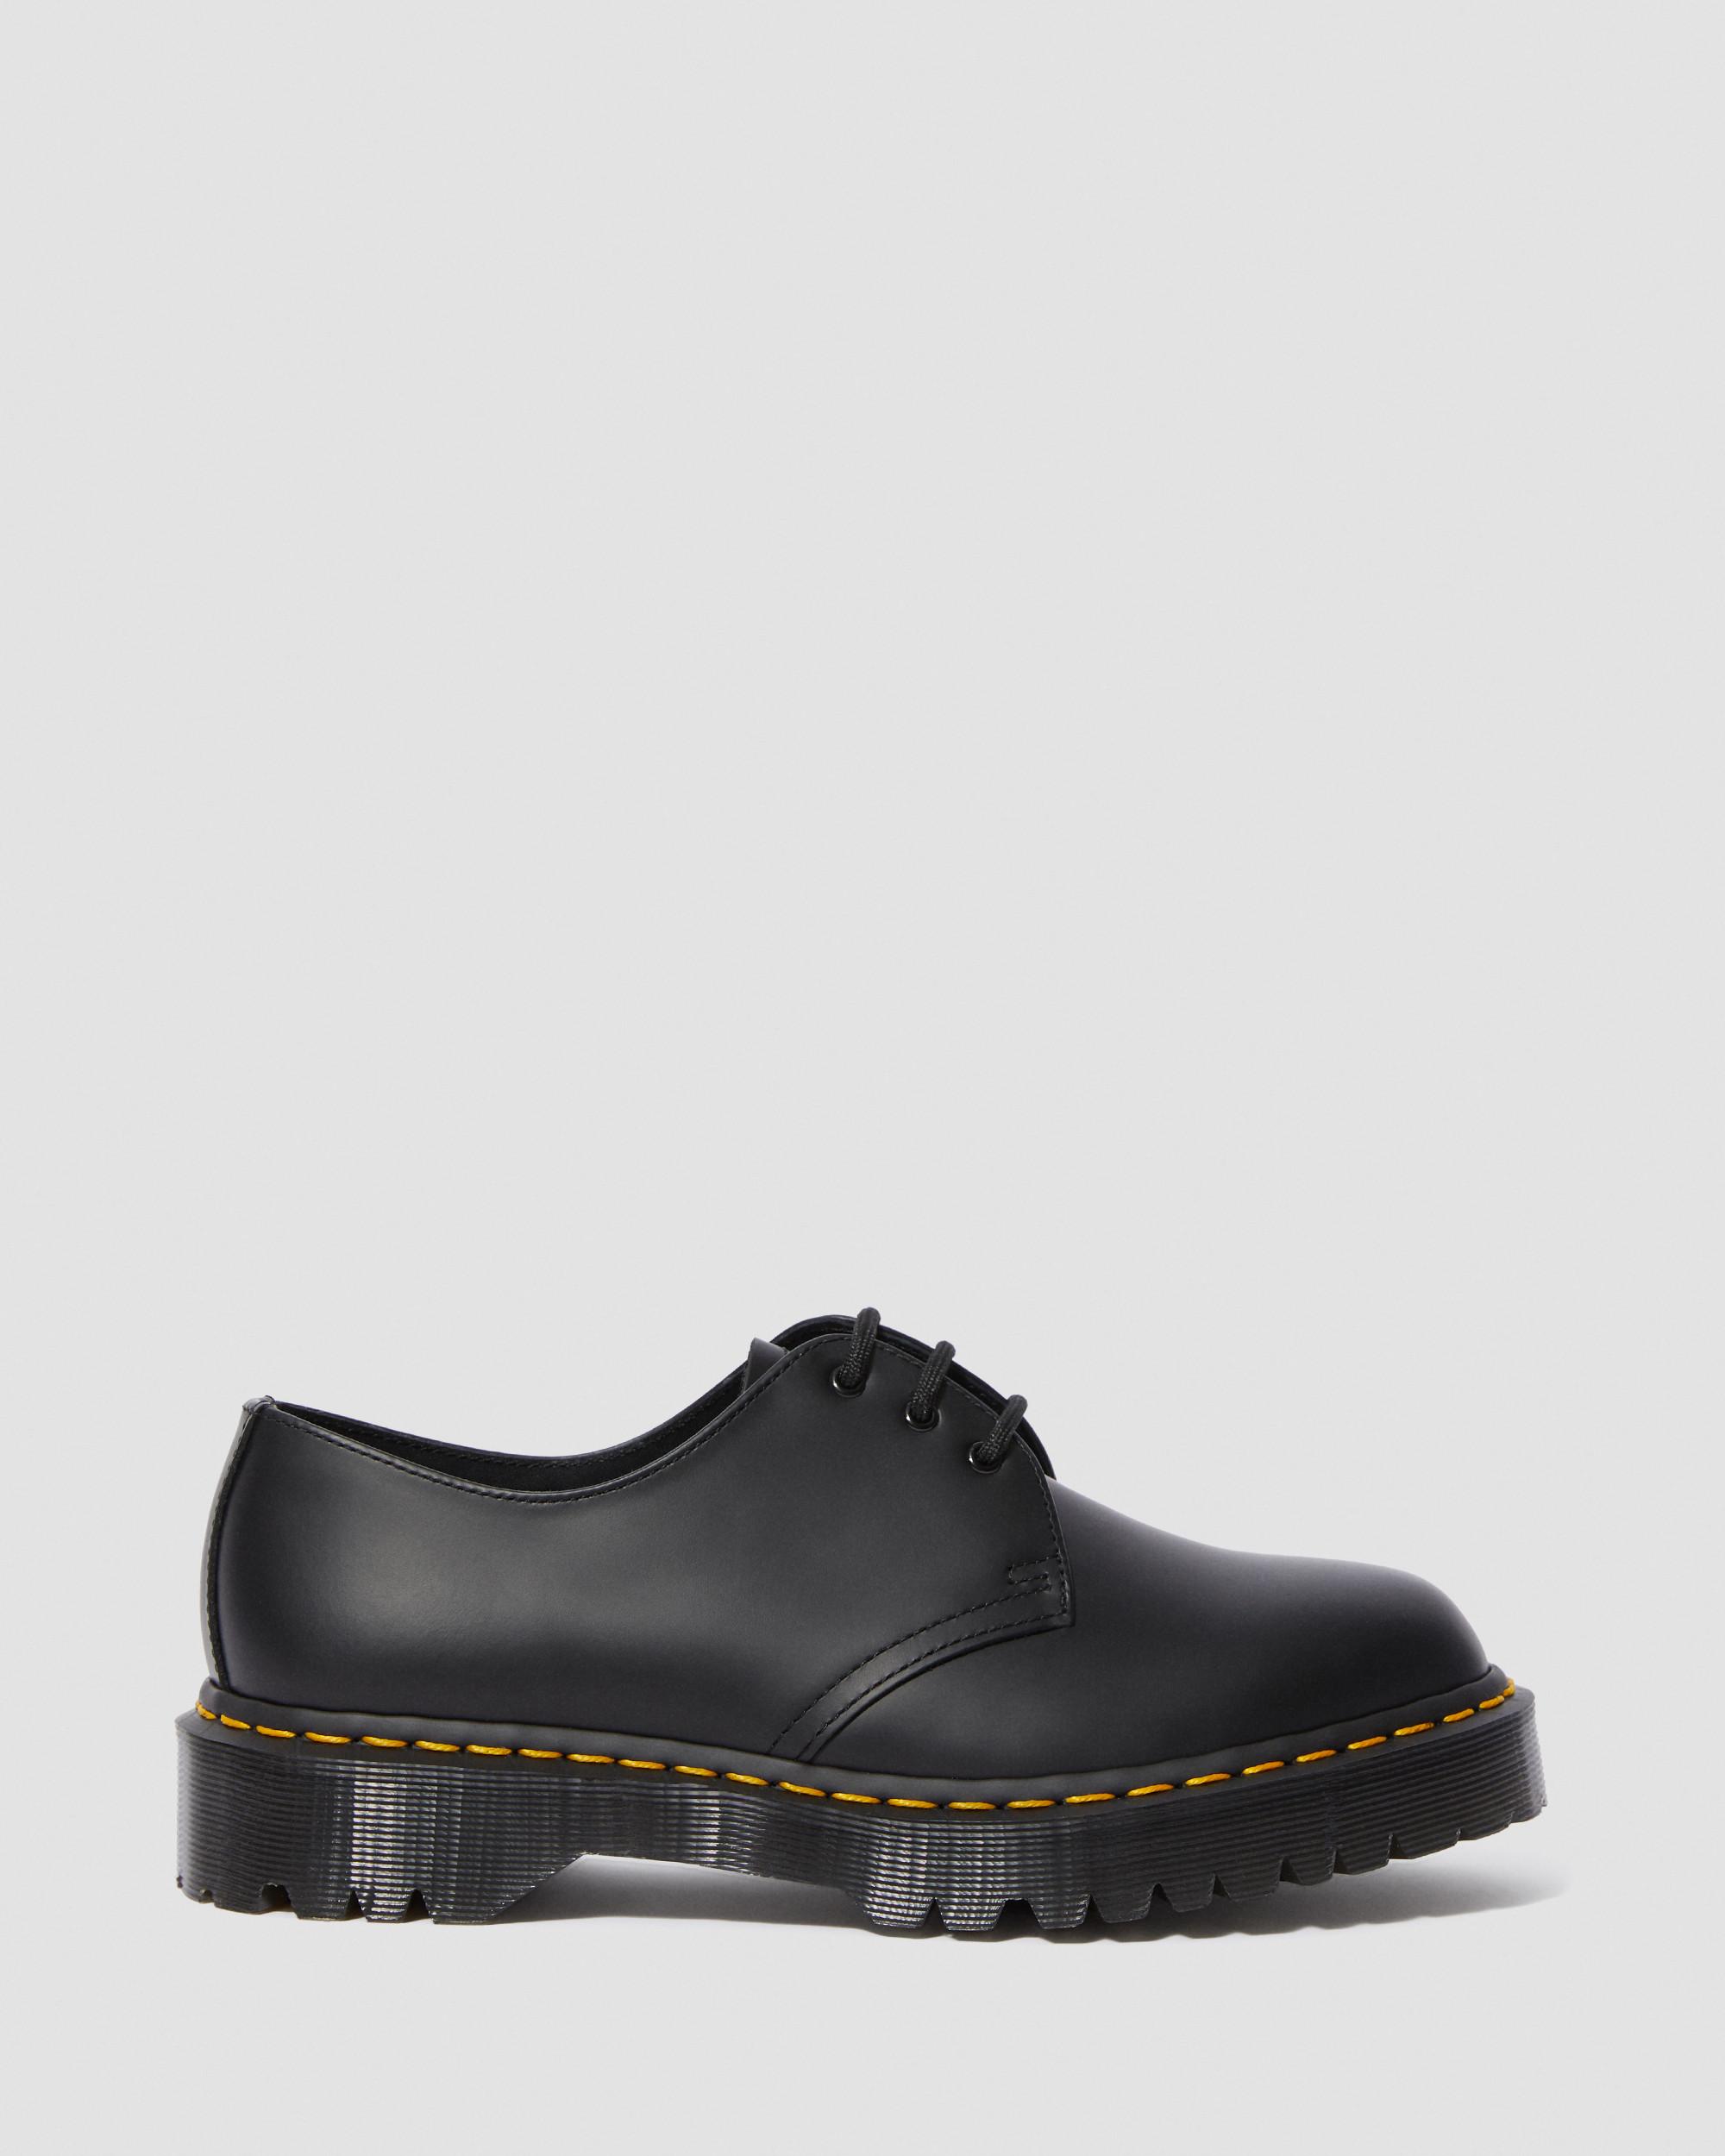 1461 Bex Smooth Leather Oxford Shoes, Black | Dr. Martens